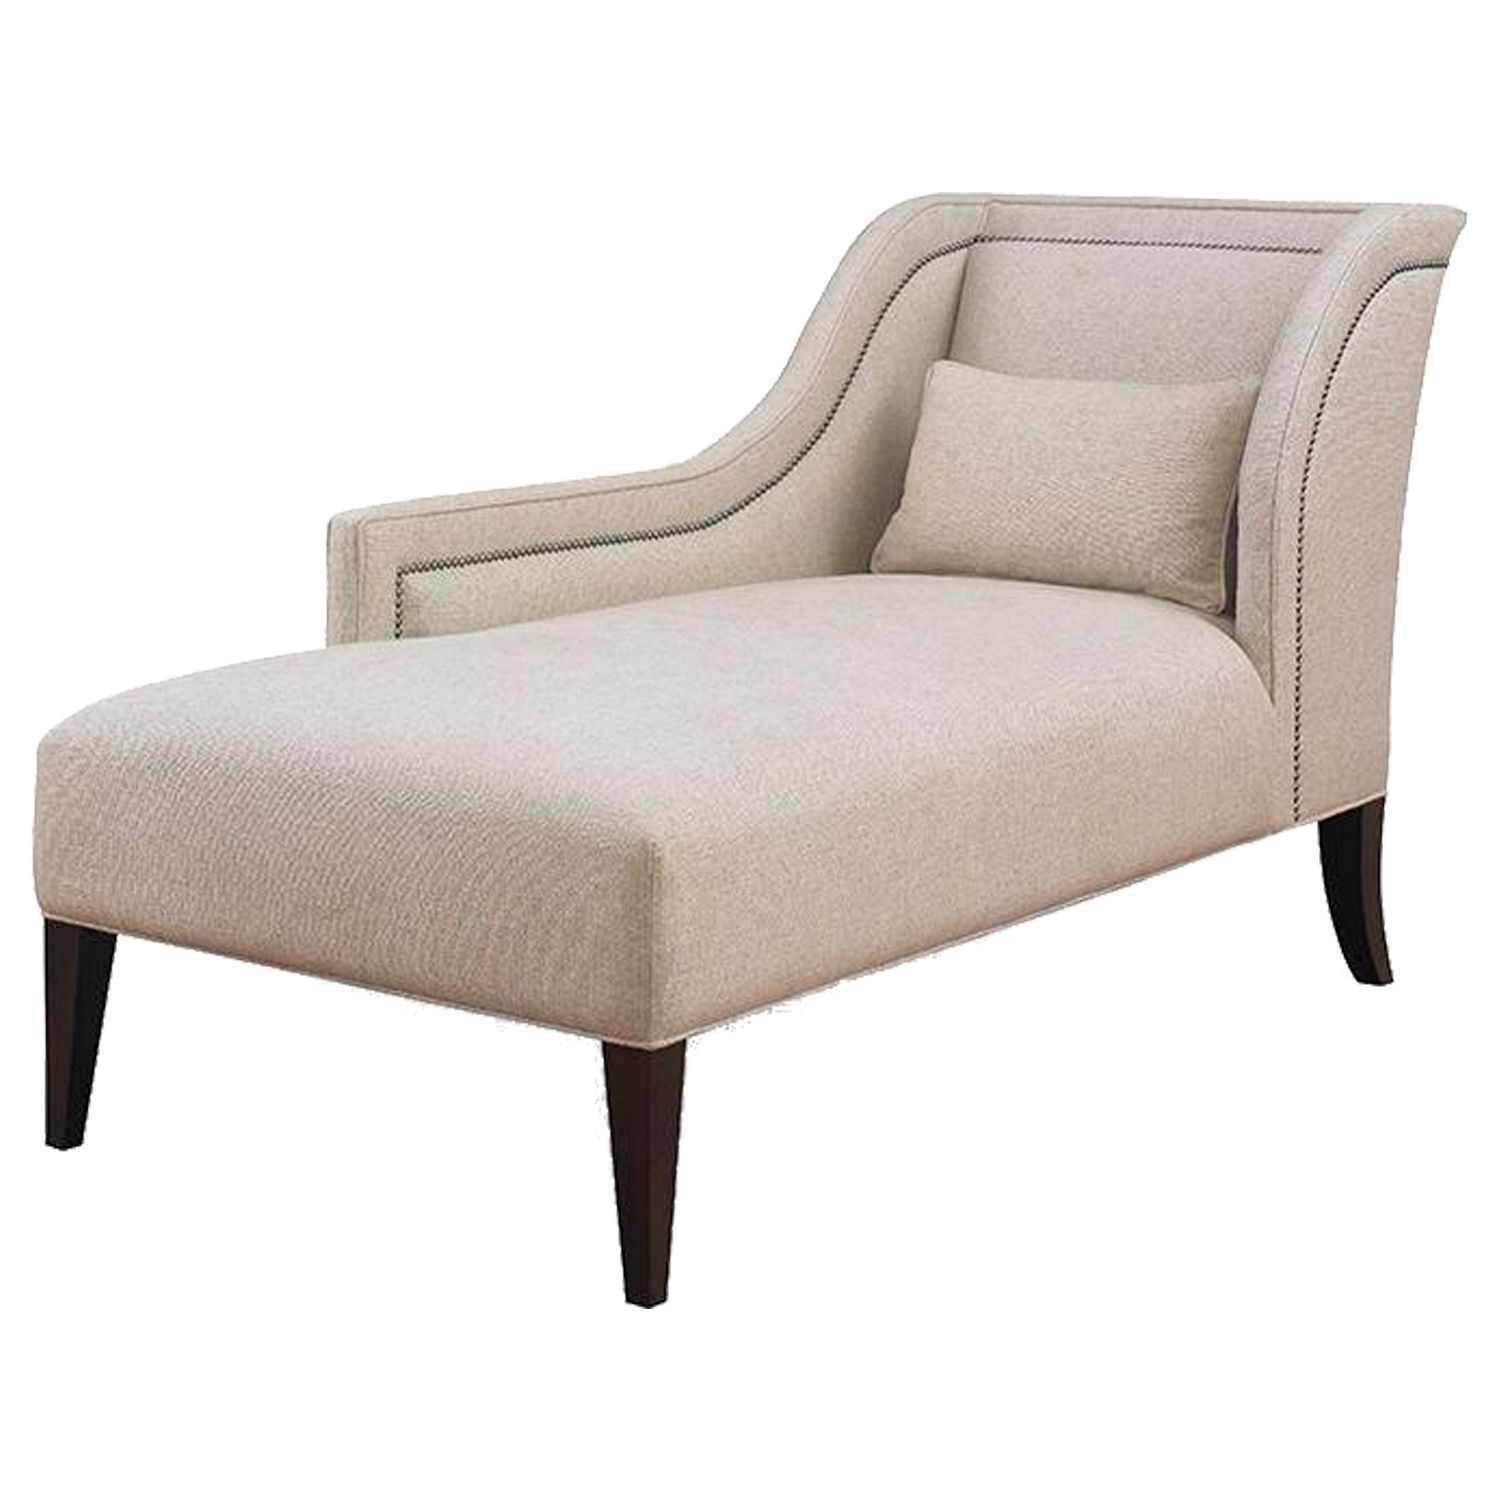 Current High End Chaise Lounge Chairs Throughout Buy Pasadena One Arm Chaisekravet – Made To Order Designer (View 9 of 15)